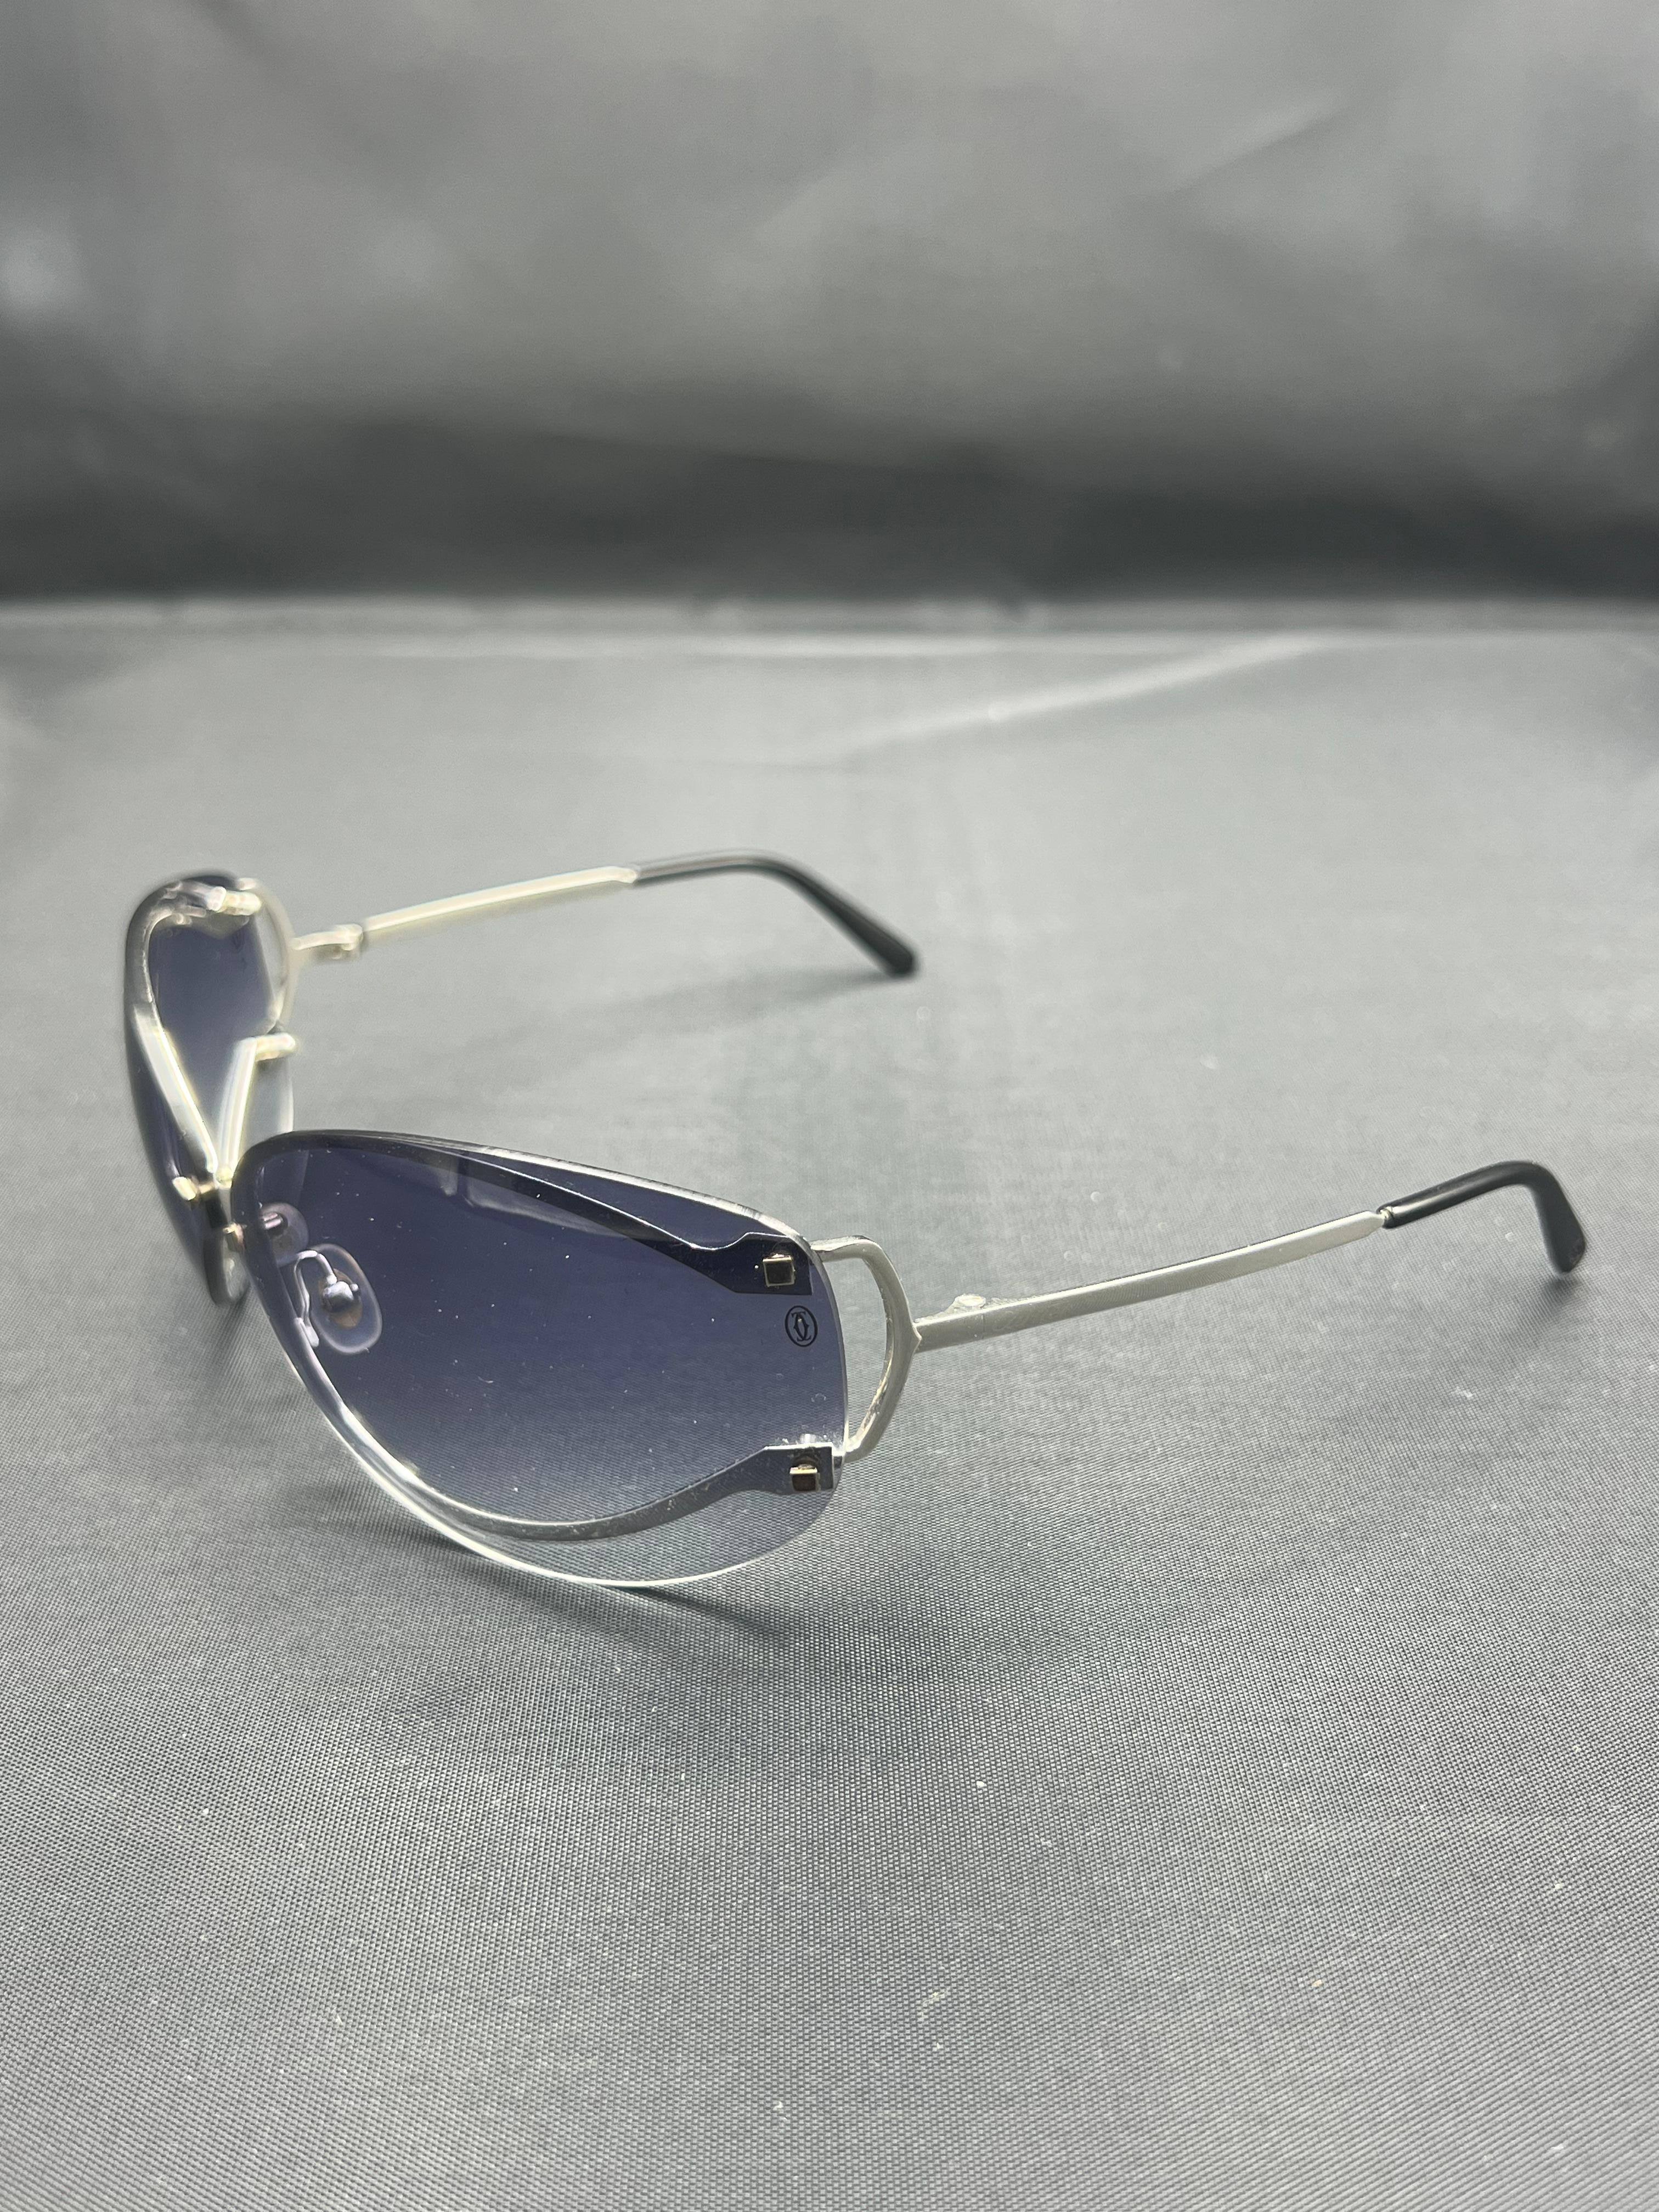 - Silver tone hardware
- Navy gradient lenses
- Oval/ cat-eye shape
- Made in France 